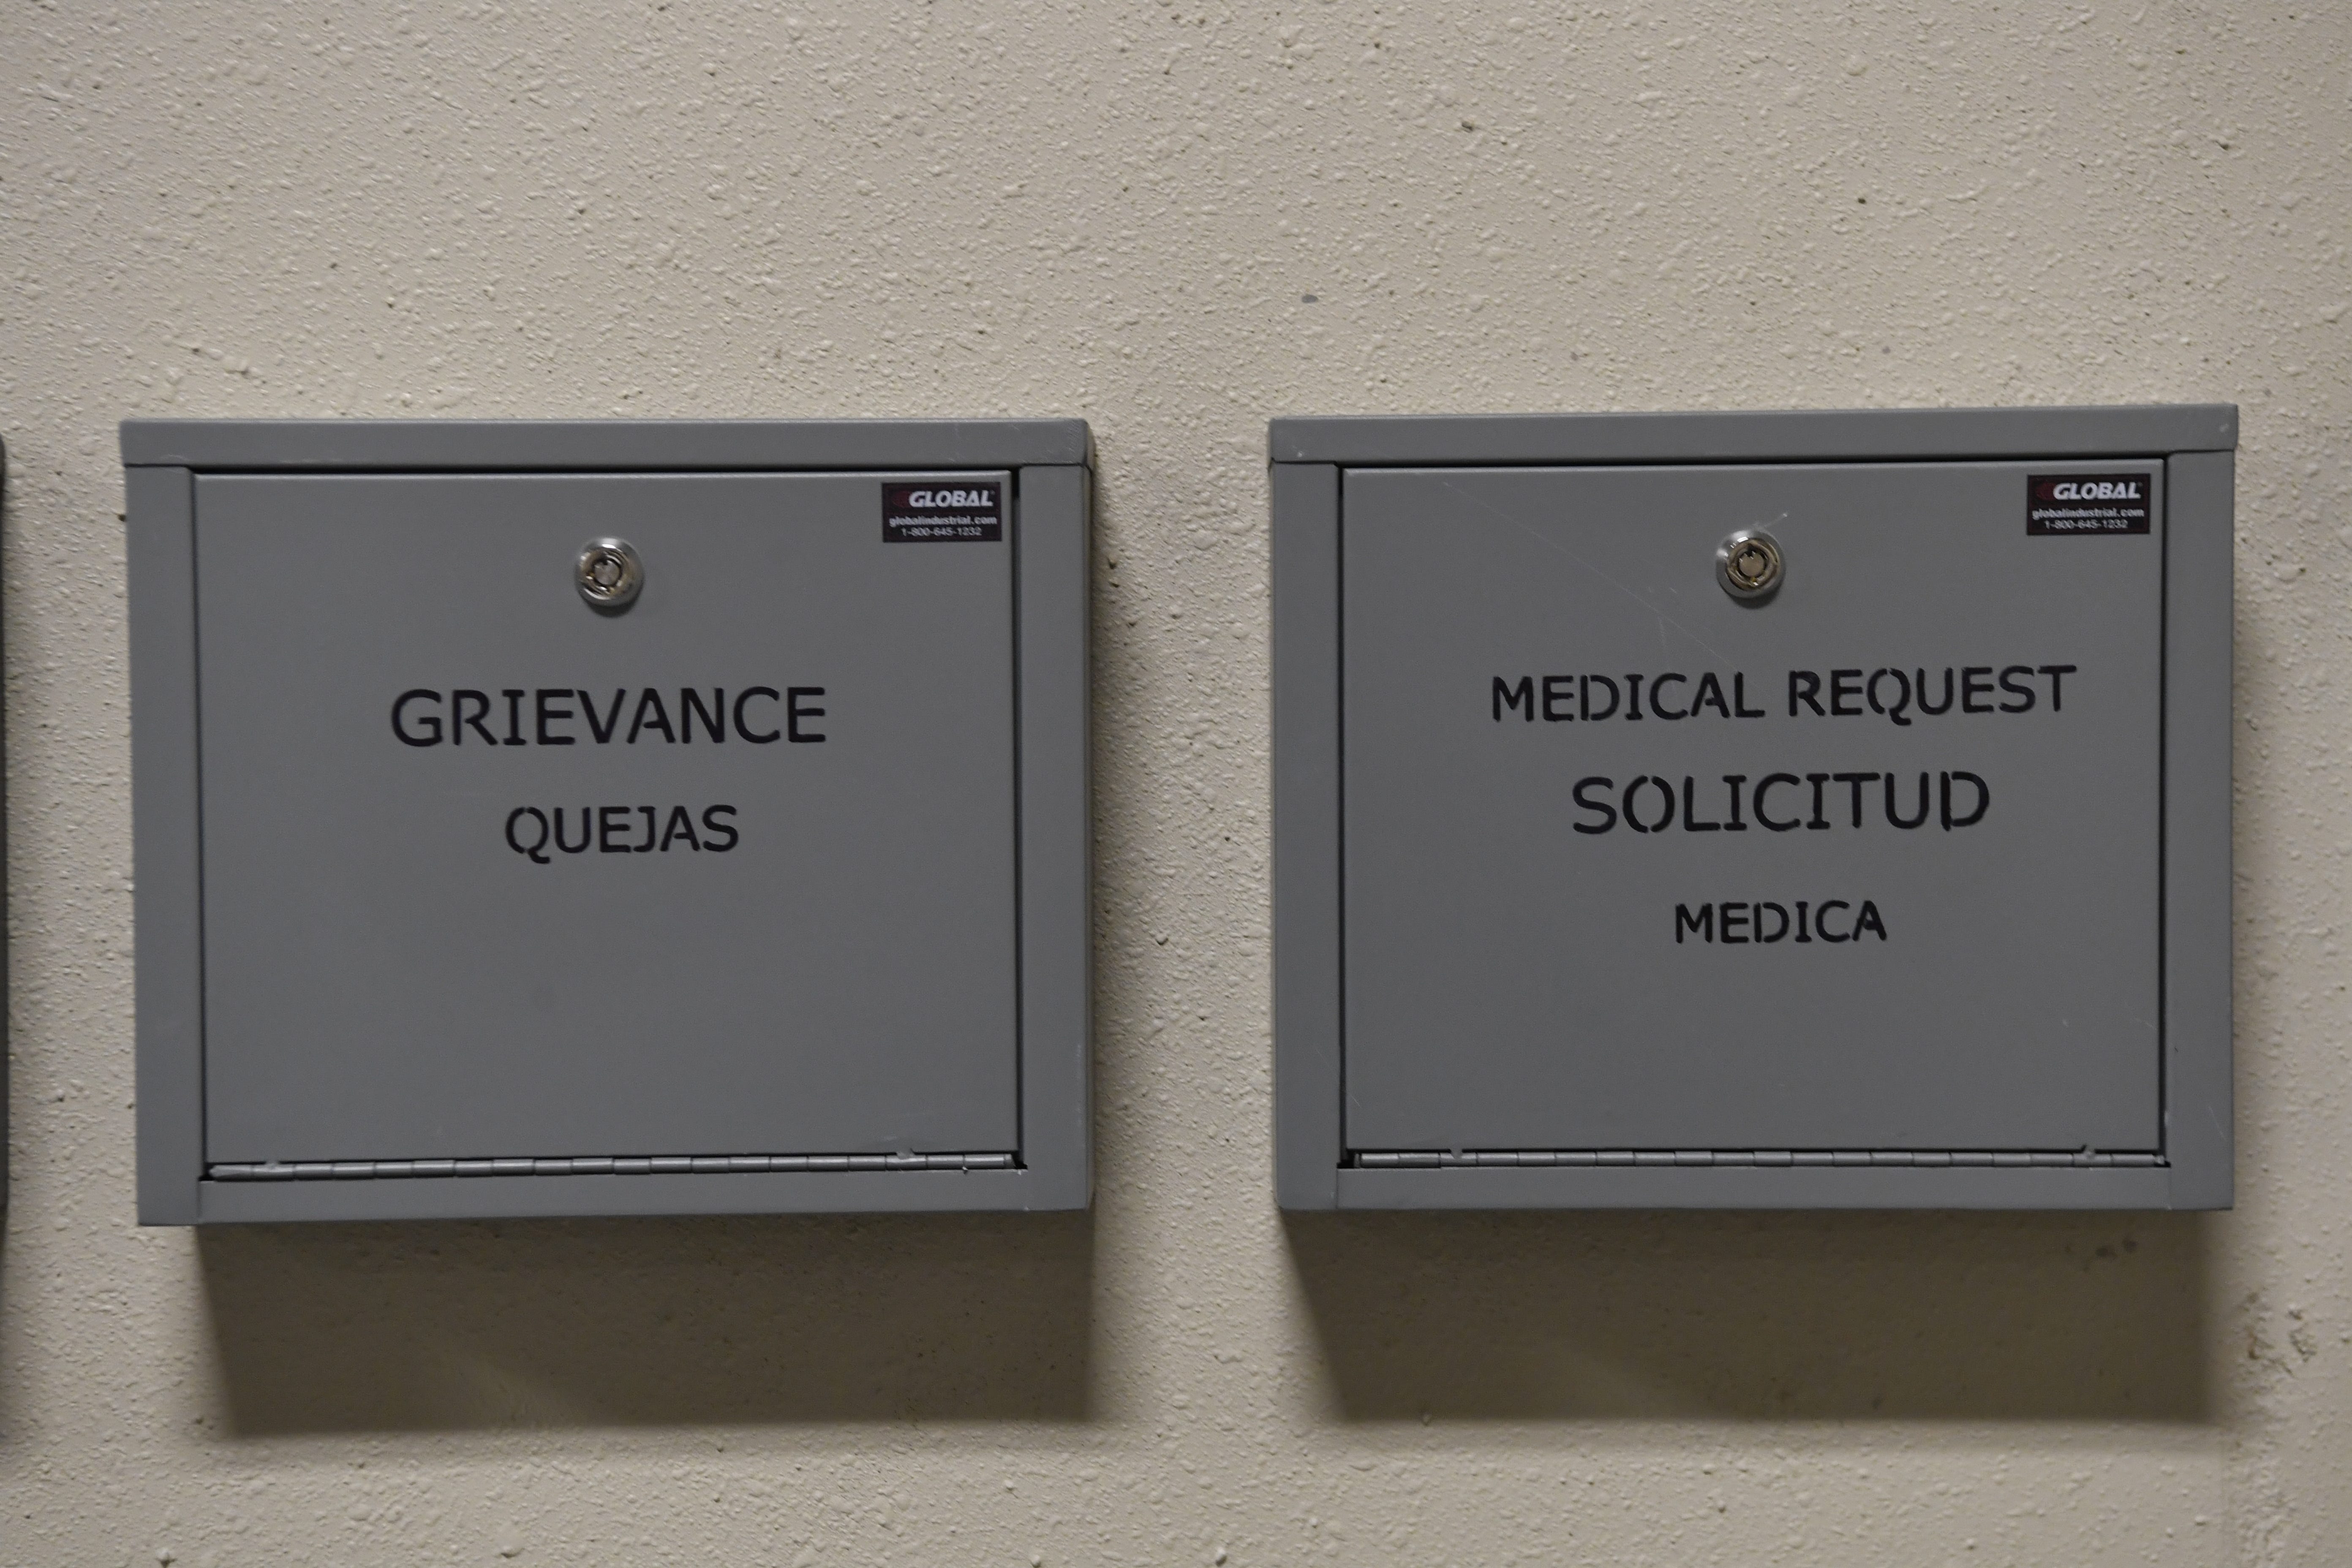 Grievance boxes are mounted in all of the living areas at the Bluebonnet Detention Center in Anson, Texas. Signs are written in both English and Spanish.